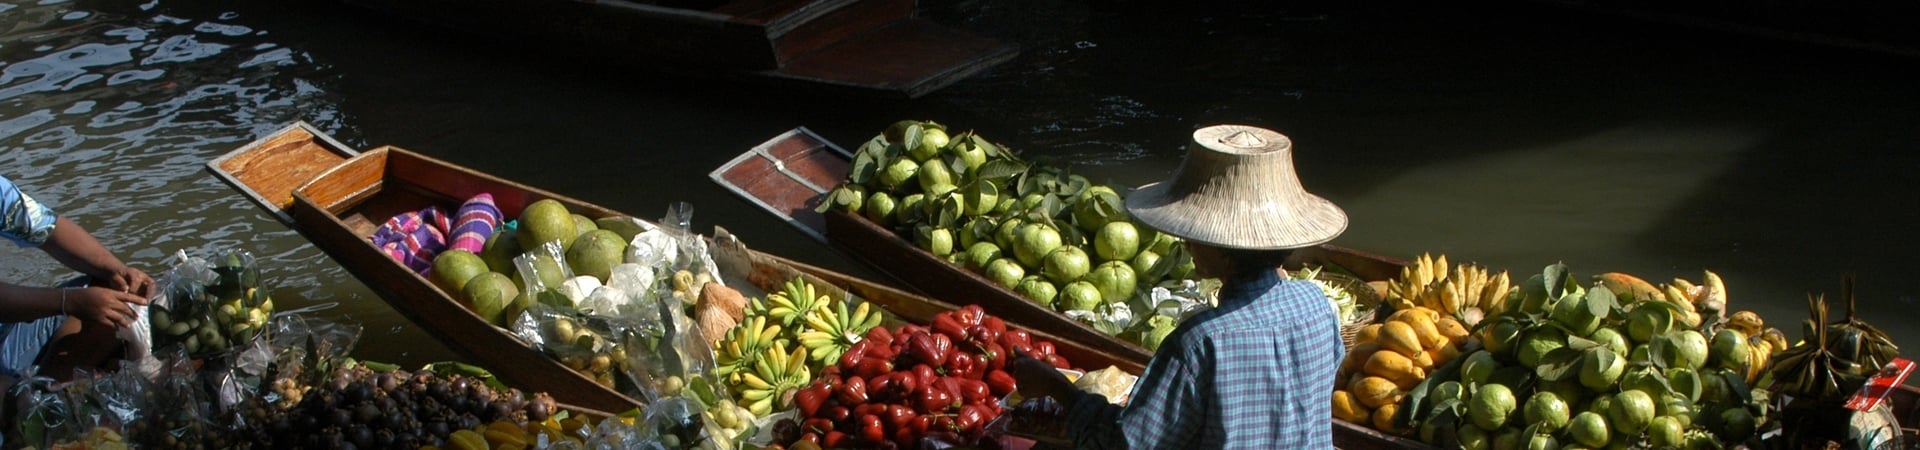 Image of Floating Markets and Ancient Lifestyle